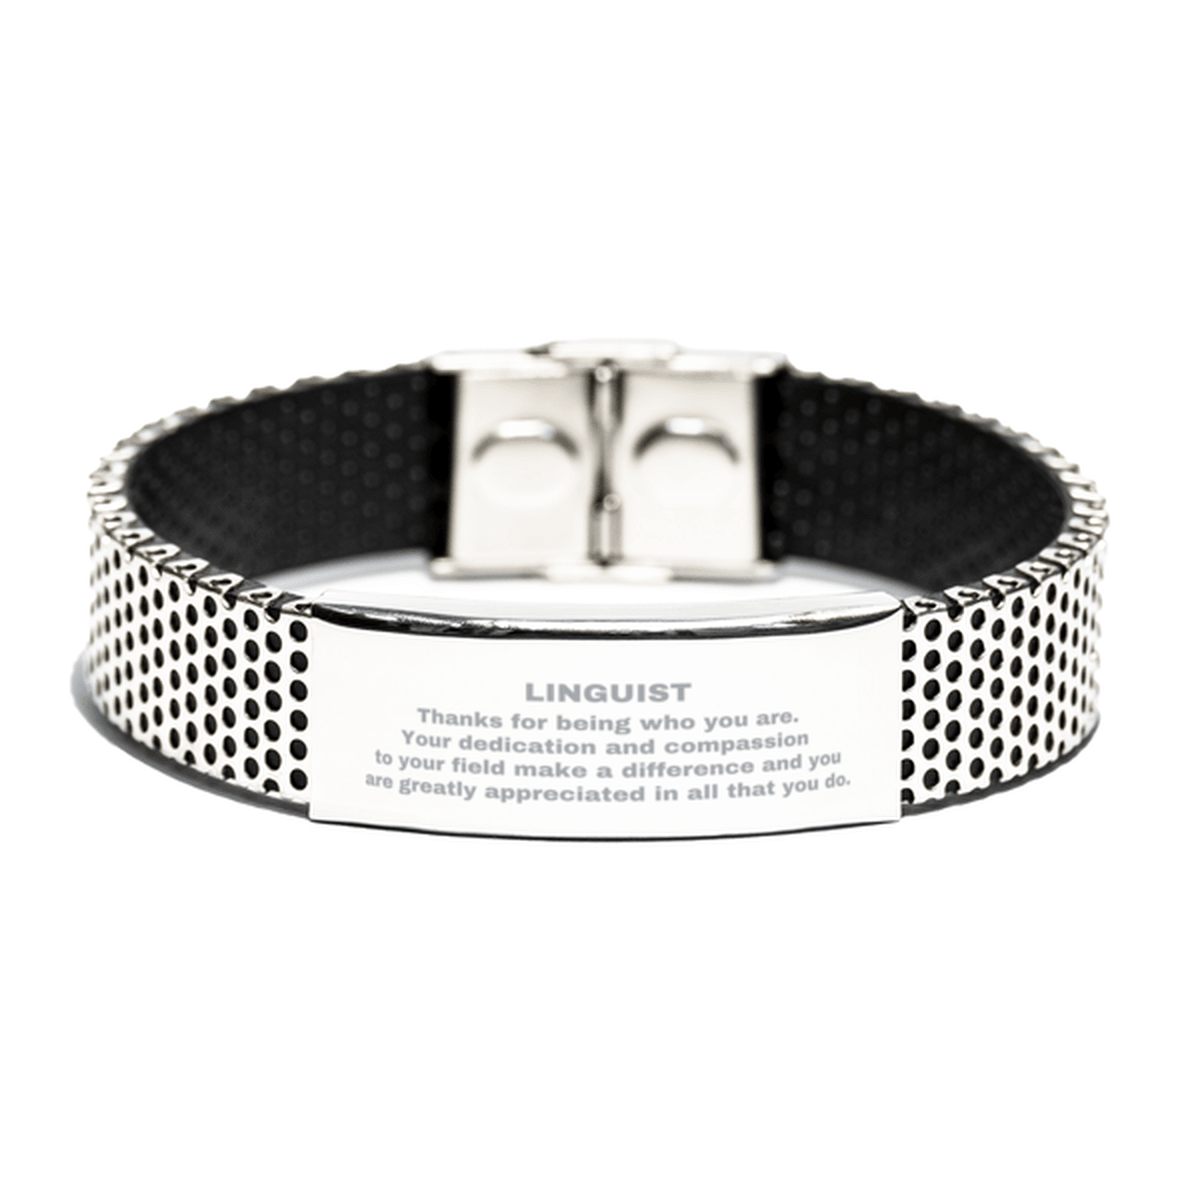 Linguist Silver Shark Mesh Stainless Steel Engraved Bracelet - Thanks for being who you are - Birthday Christmas Jewelry Gifts Coworkers Colleague Boss - Mallard Moon Gift Shop